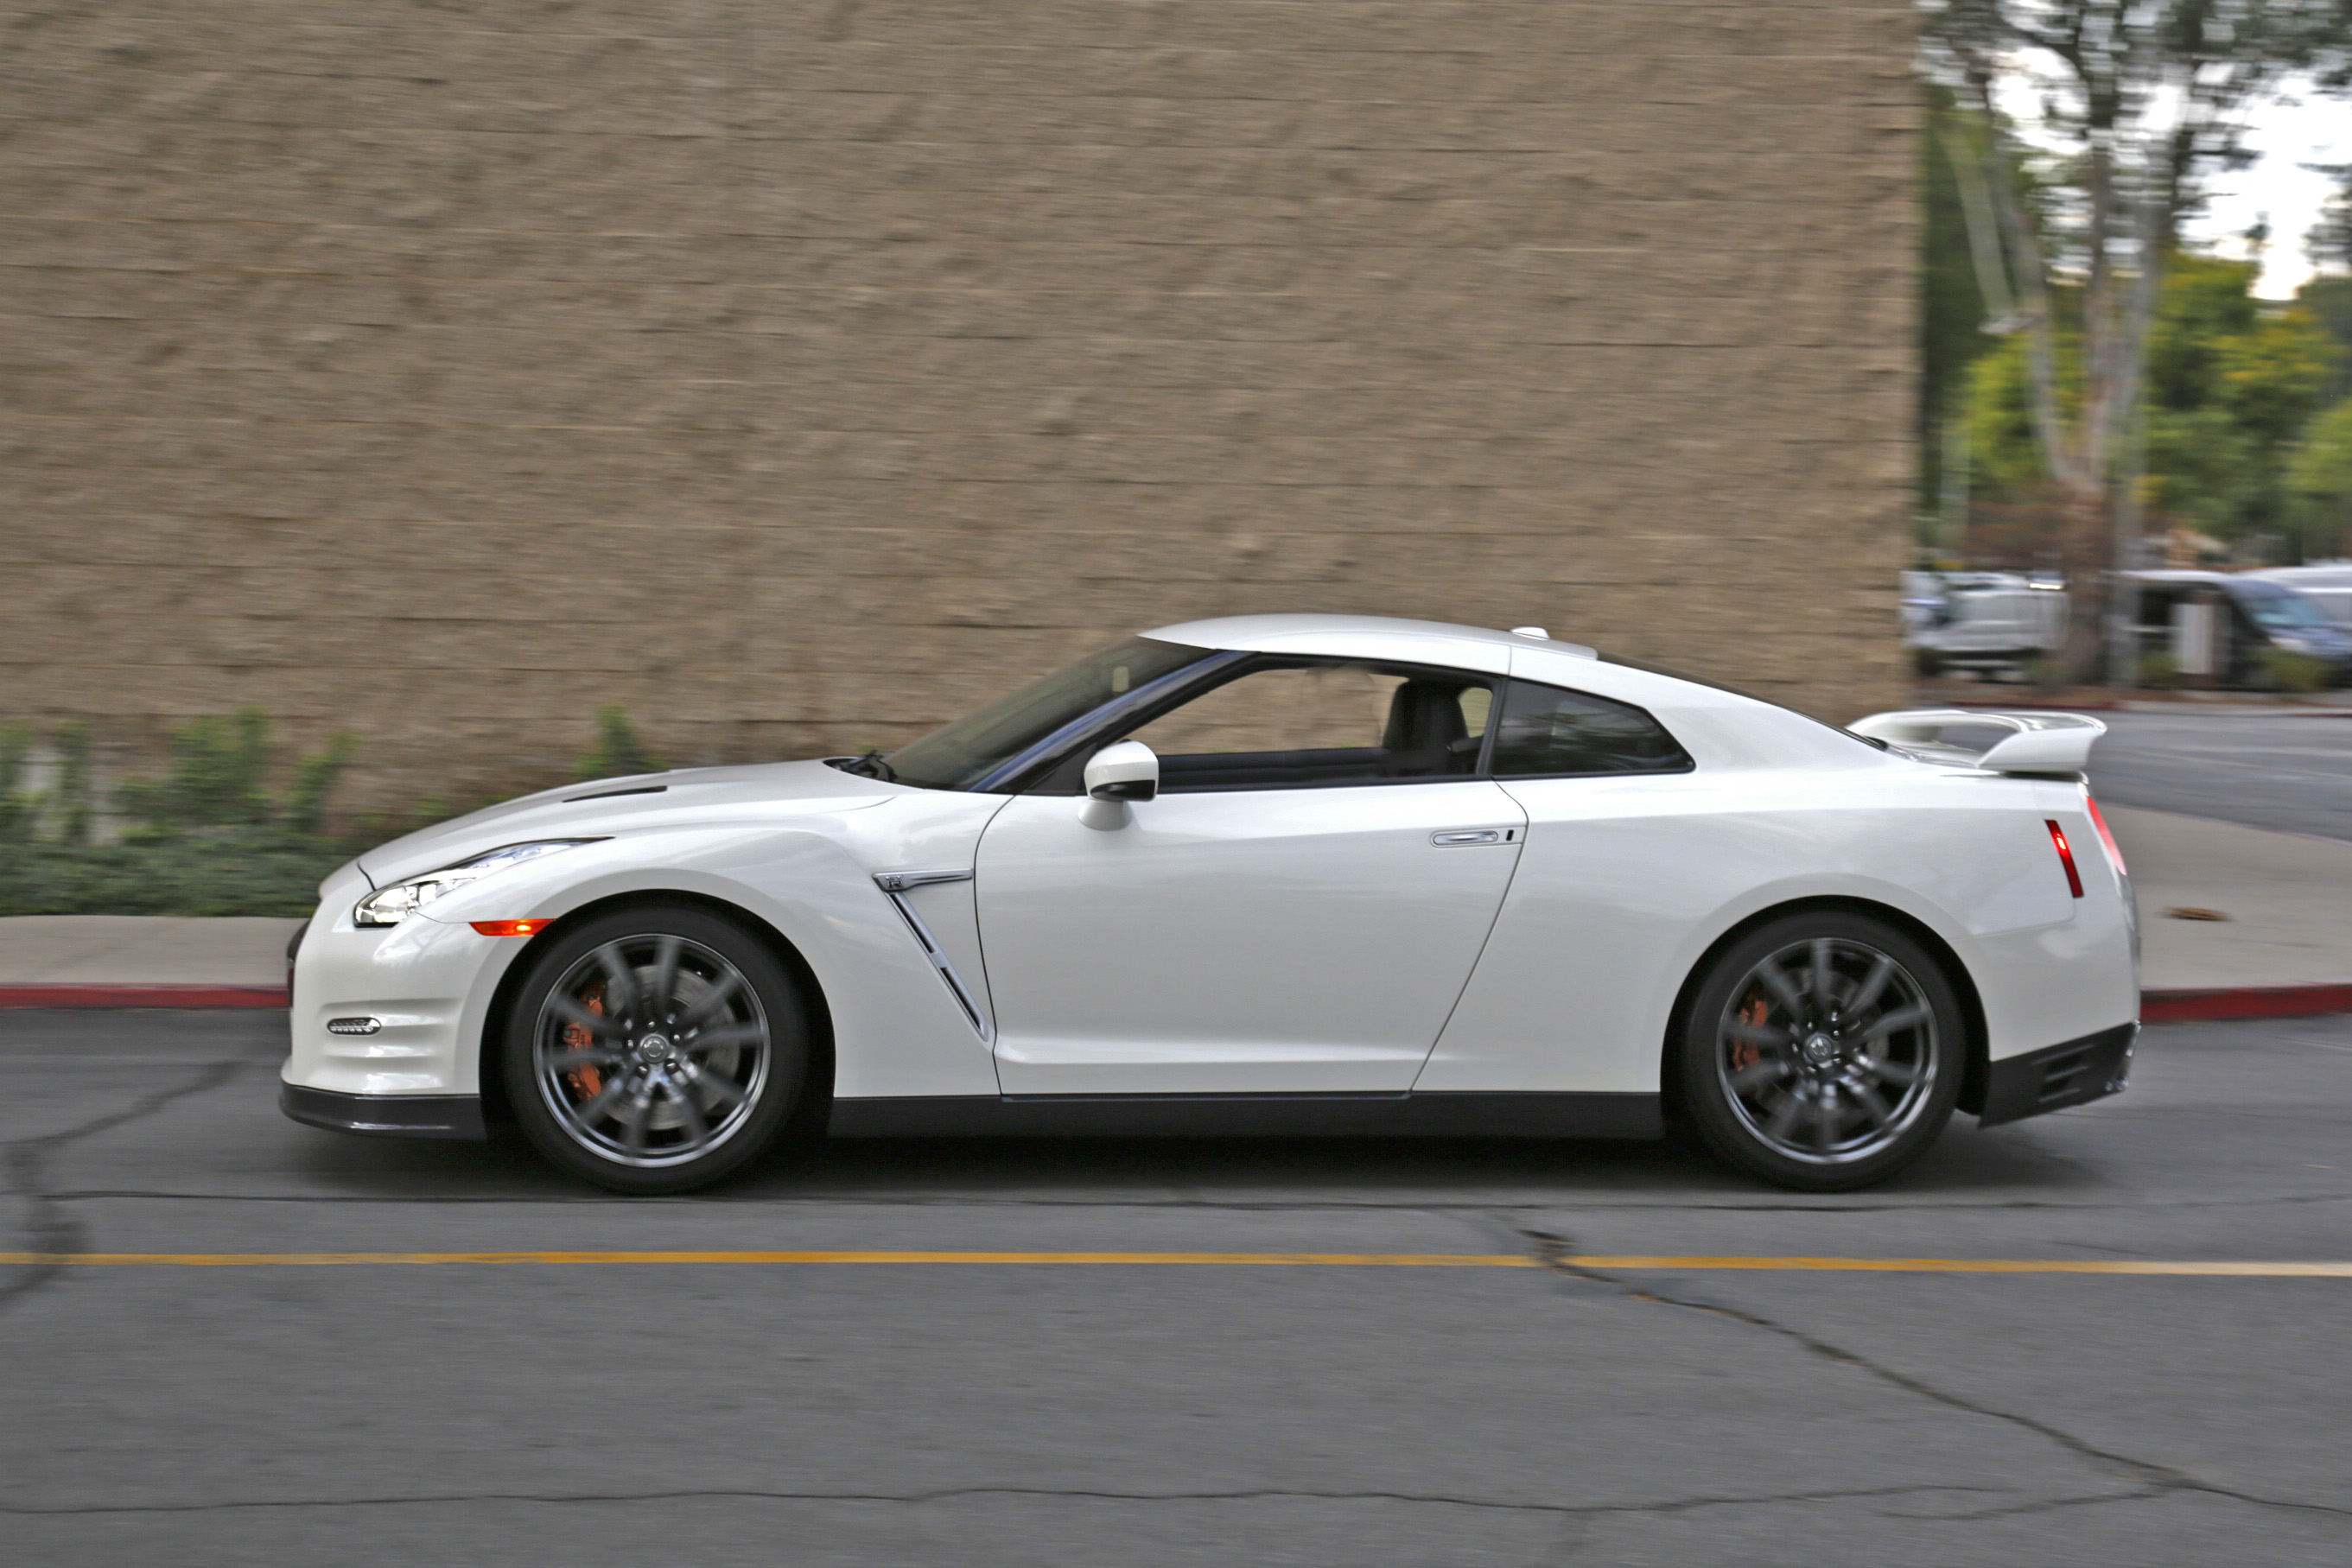 Meet Up With Us and Our Nissan GT-R at the Petersen Museum March 26